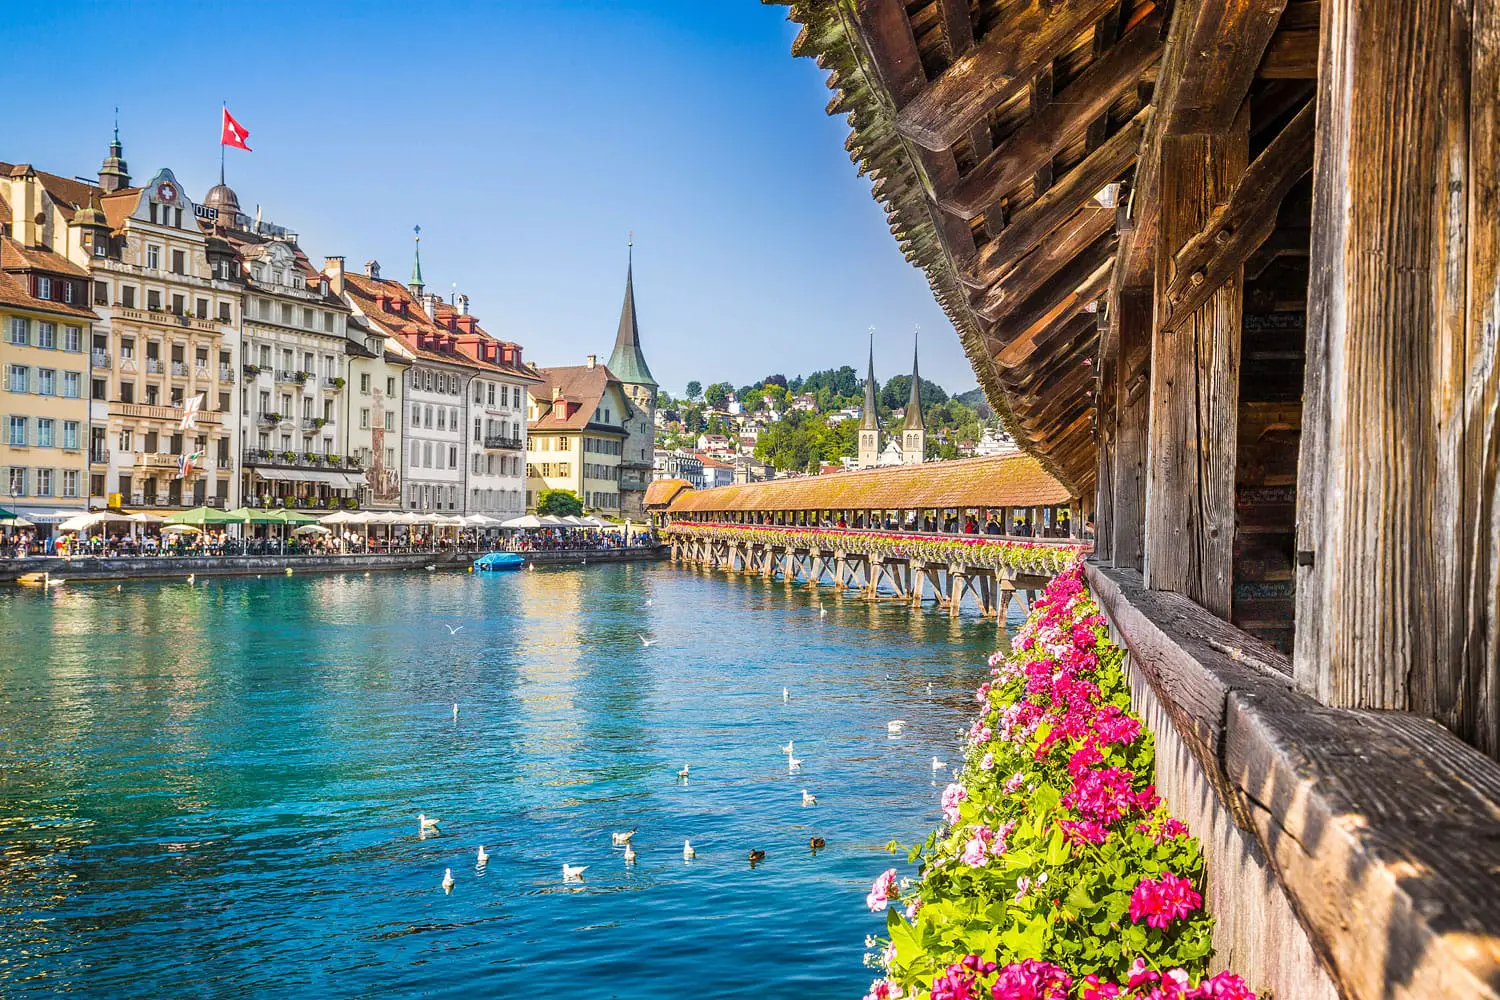 Famous Chapel Bridge in the historic city center of Lucerne, the city's symbol and one of Switzerland's main tourist attractions and views on a sunny day in summer, Canton of Lucerne, Switzerland